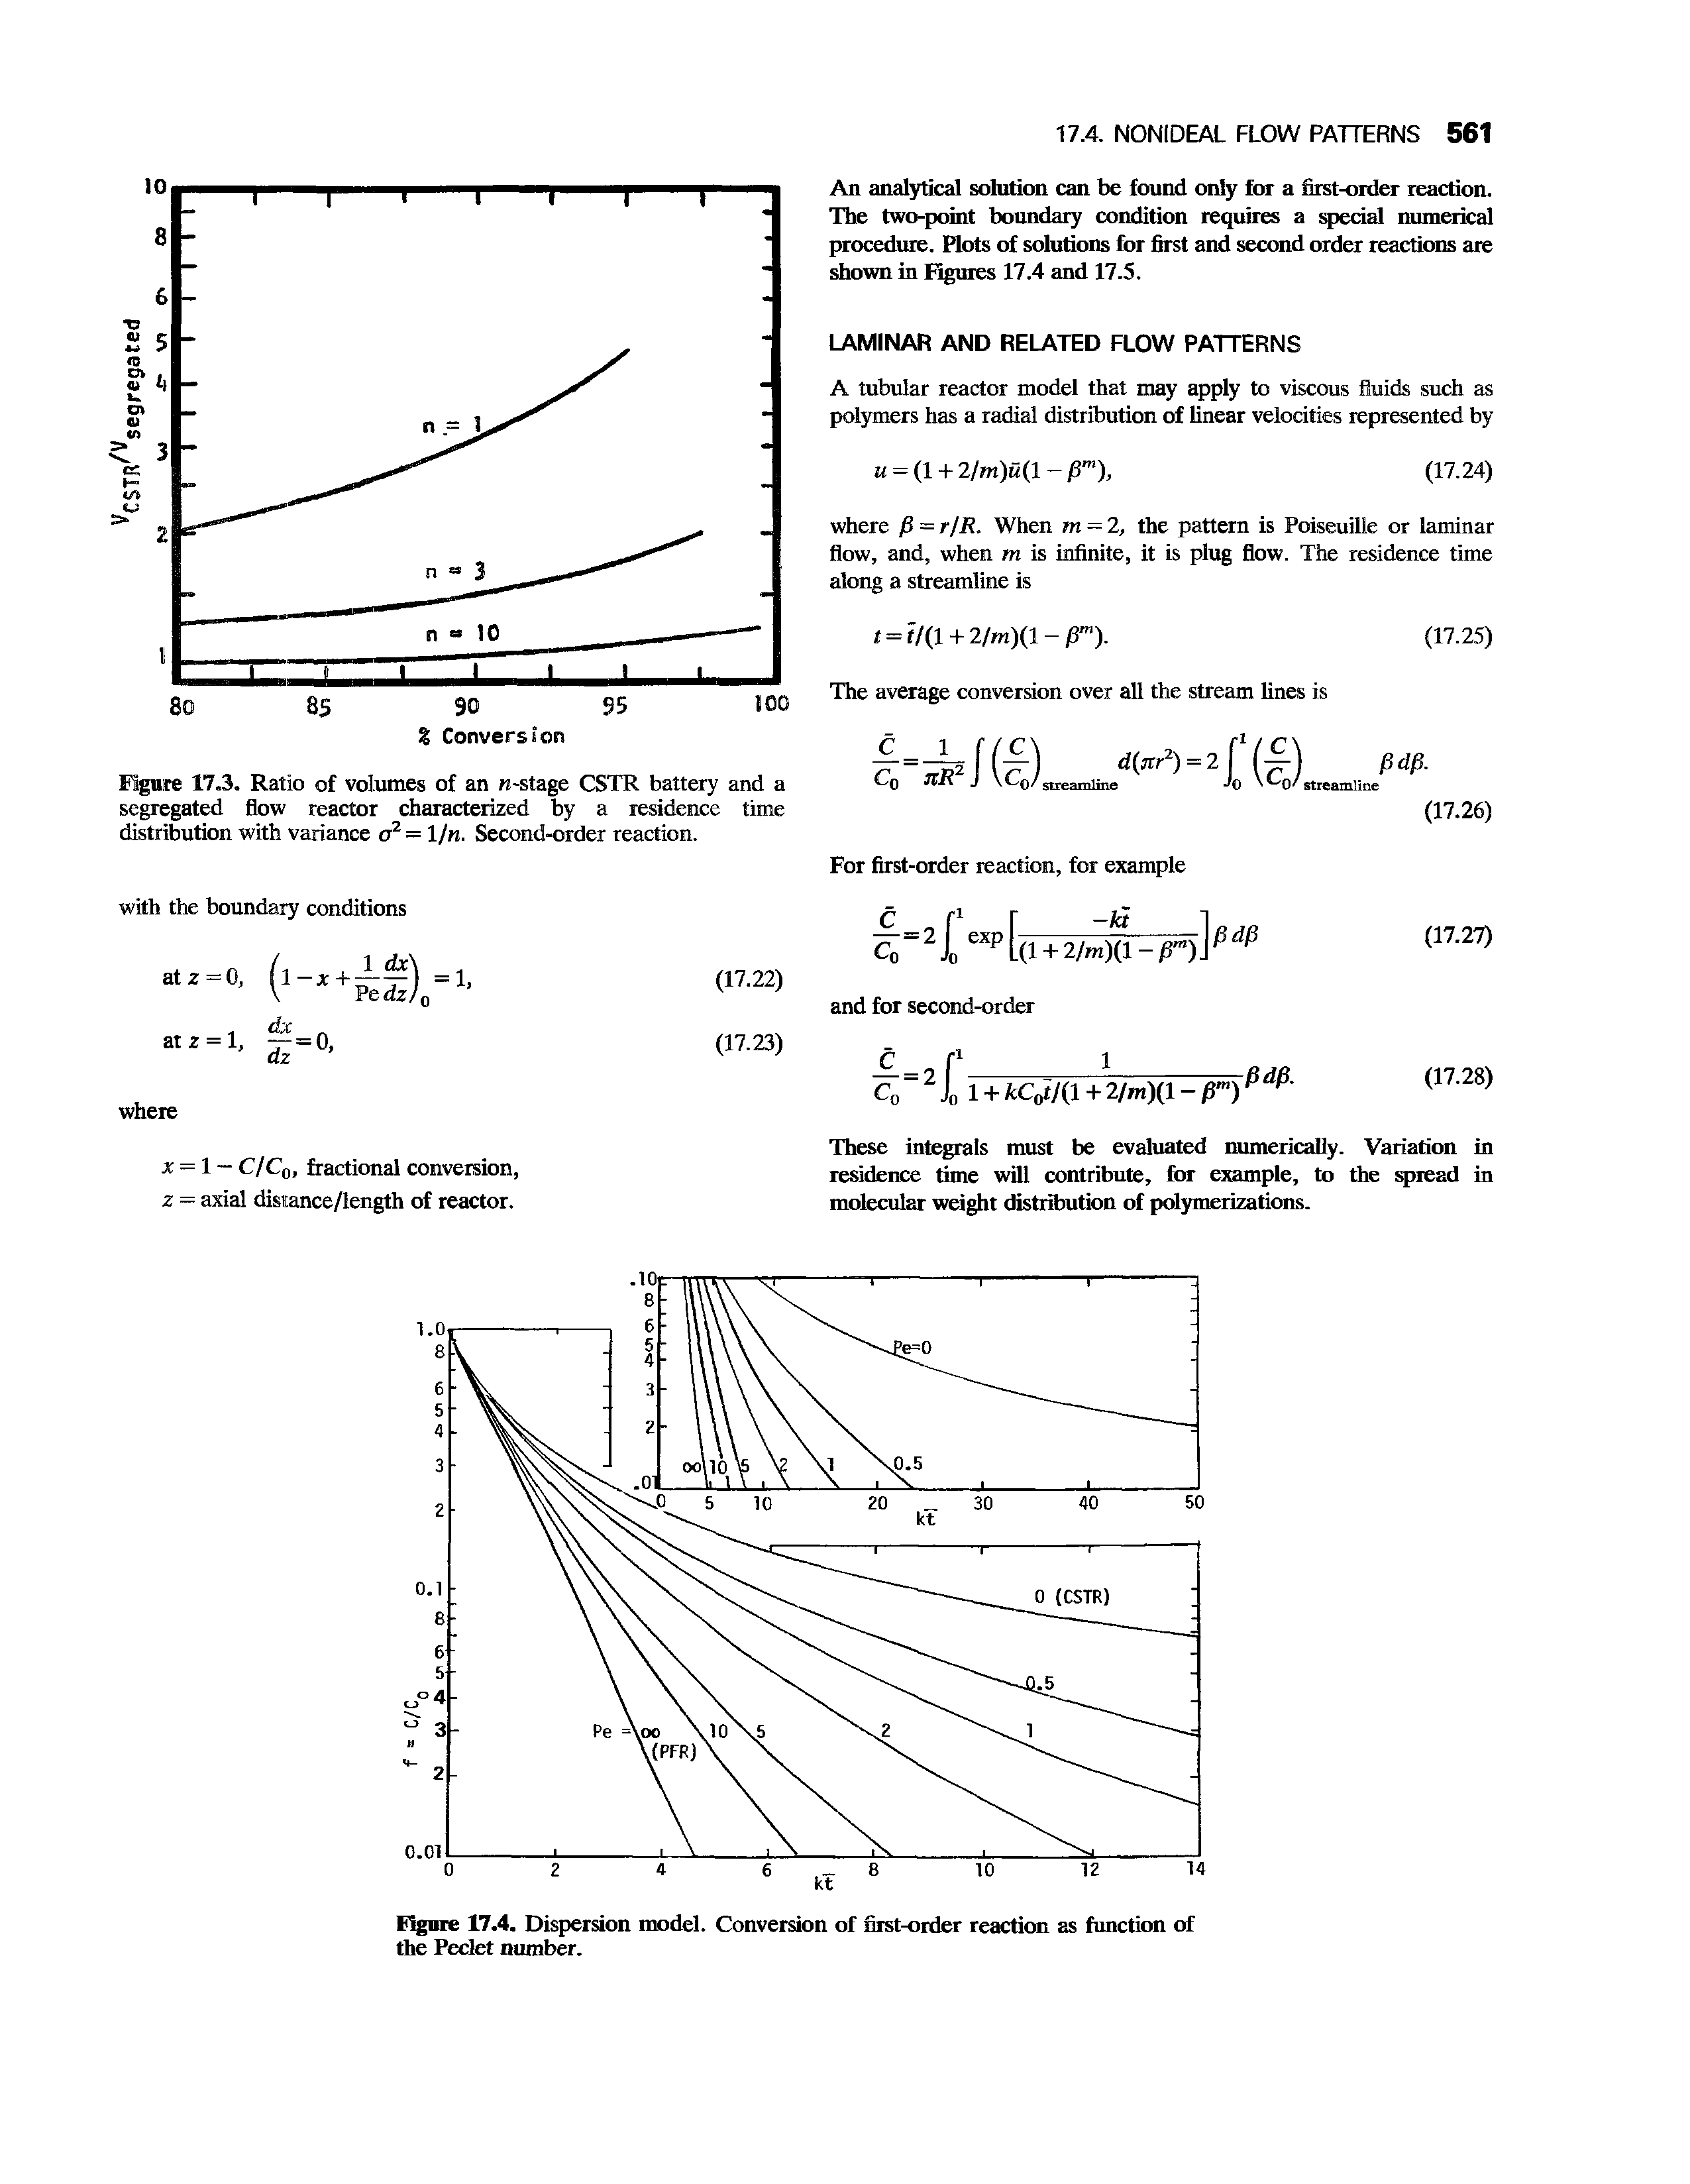 Figure 17.4. Dispersion model. Conversion of first-order reaction as function of the Peclet number.